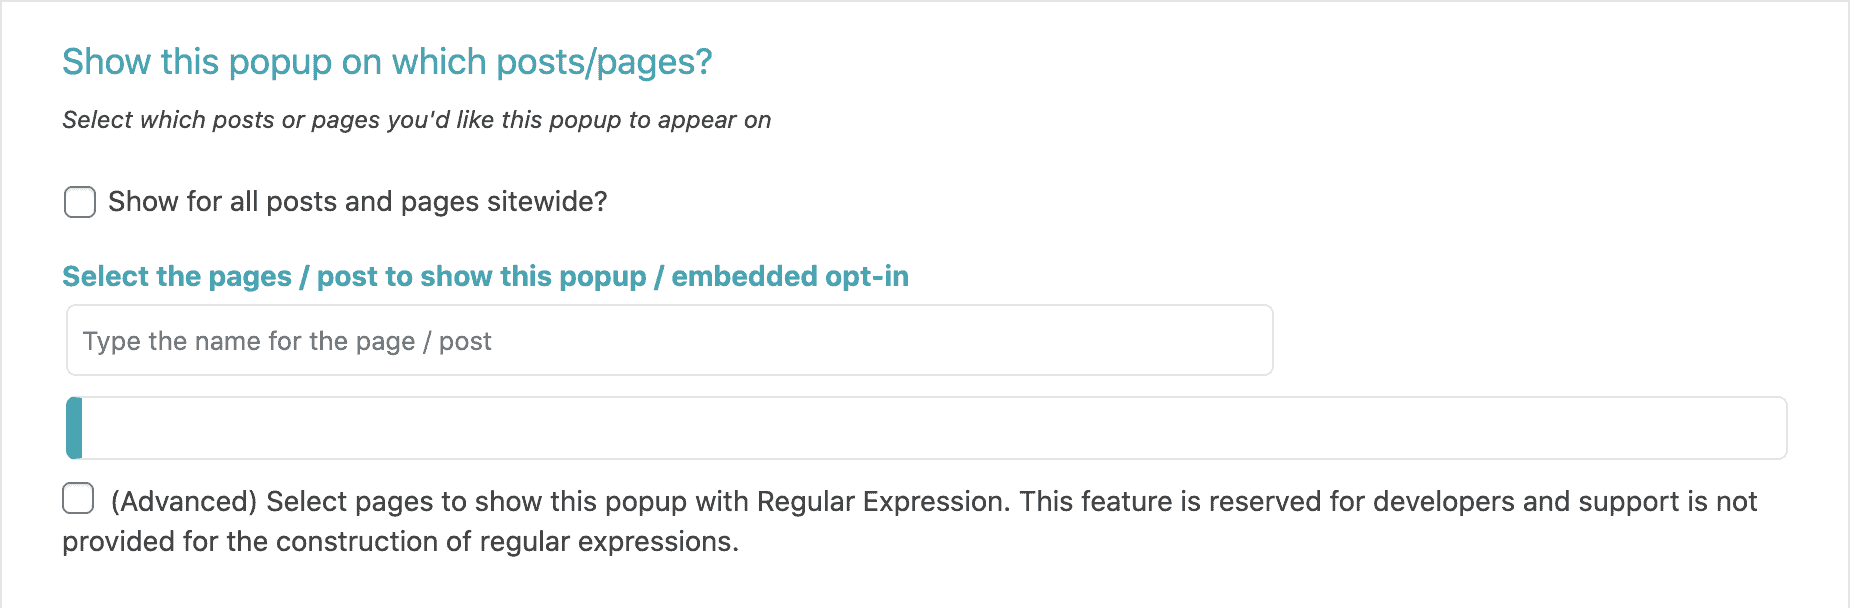 Which pages should your popup appear on